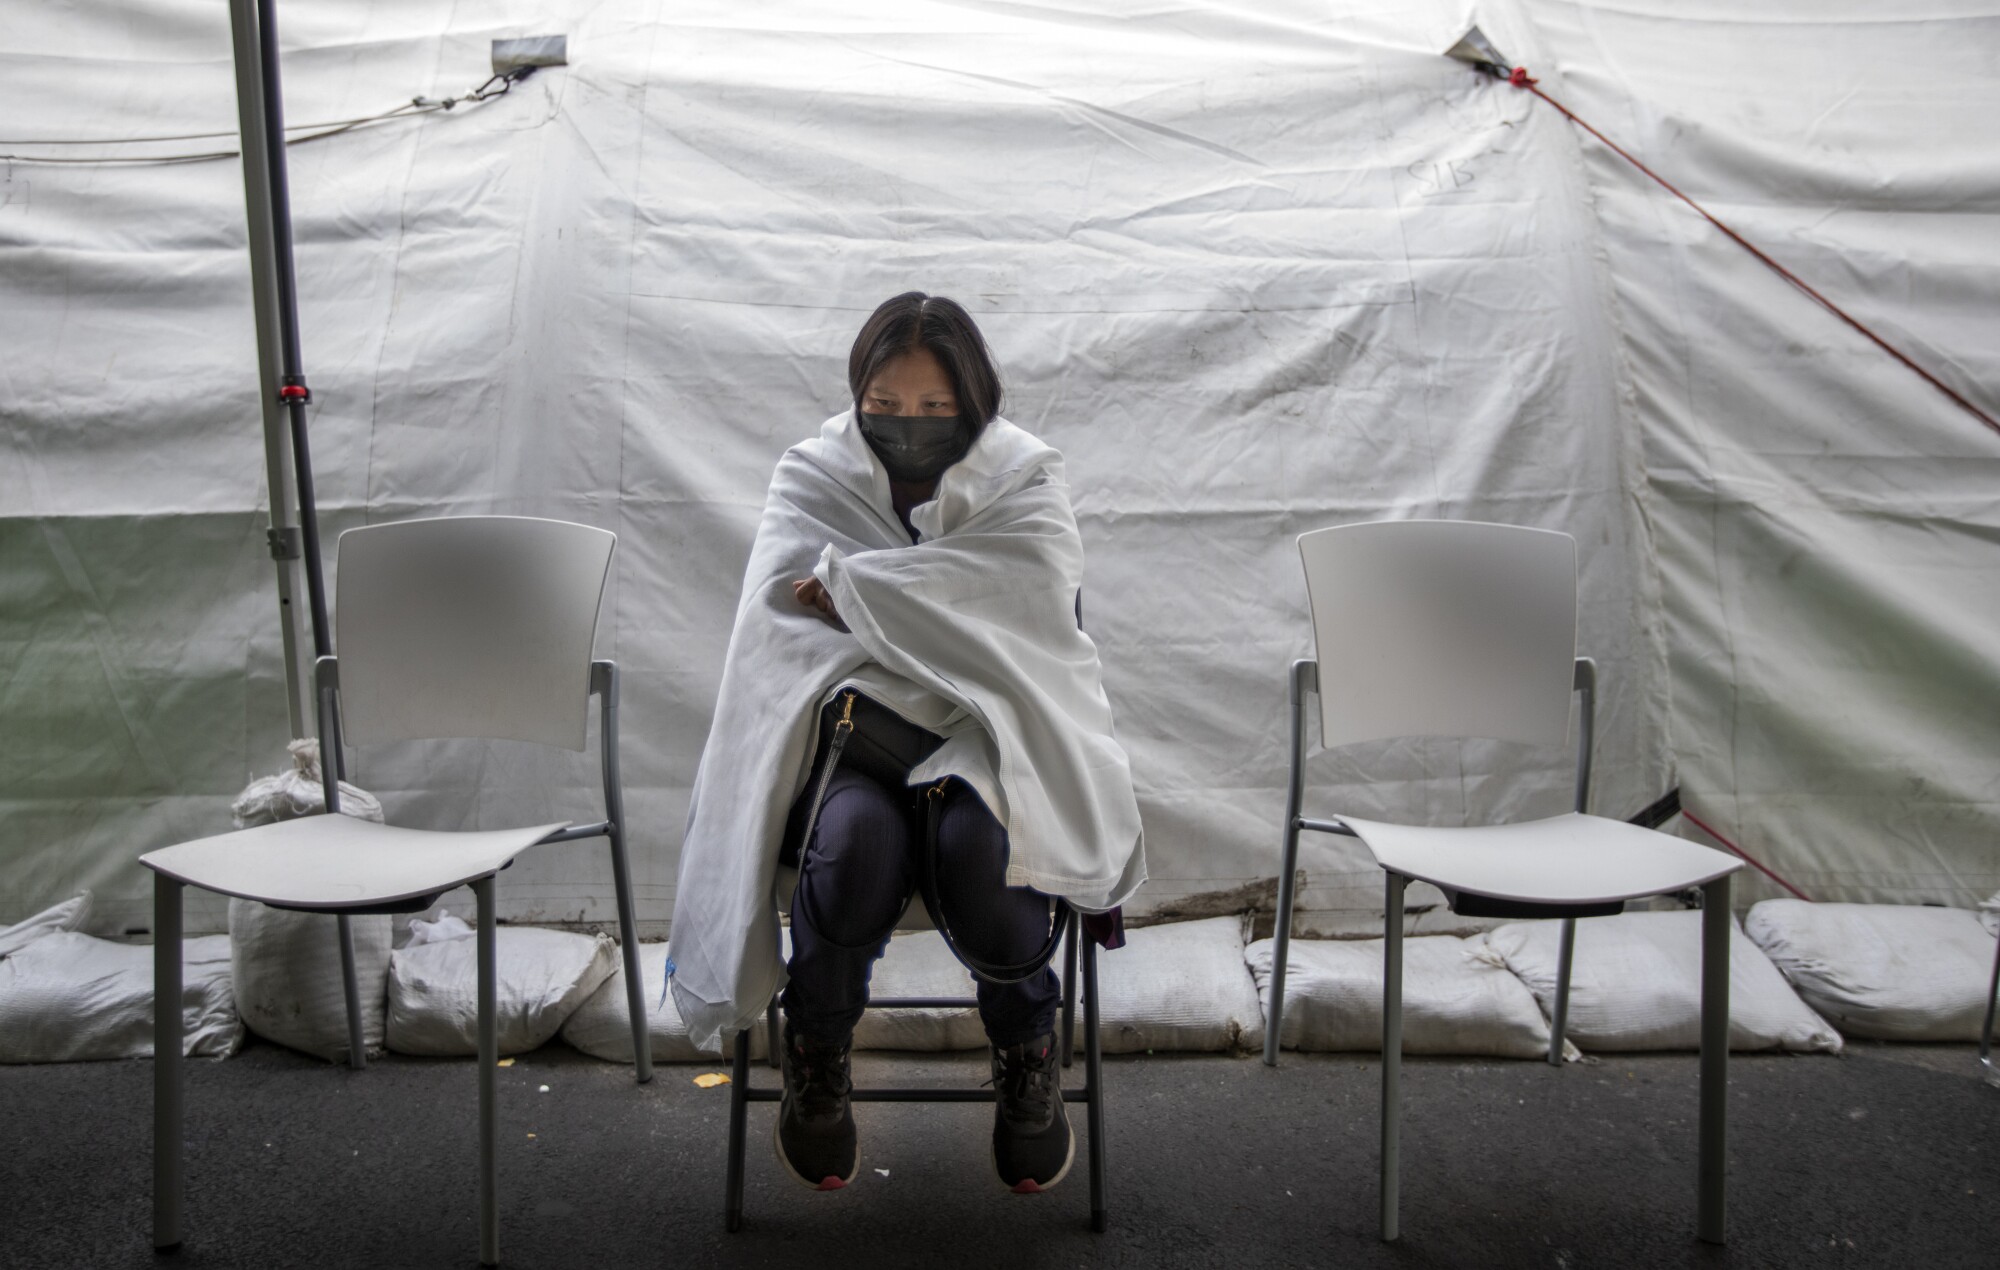 A patient sits in a blanket inside a tent